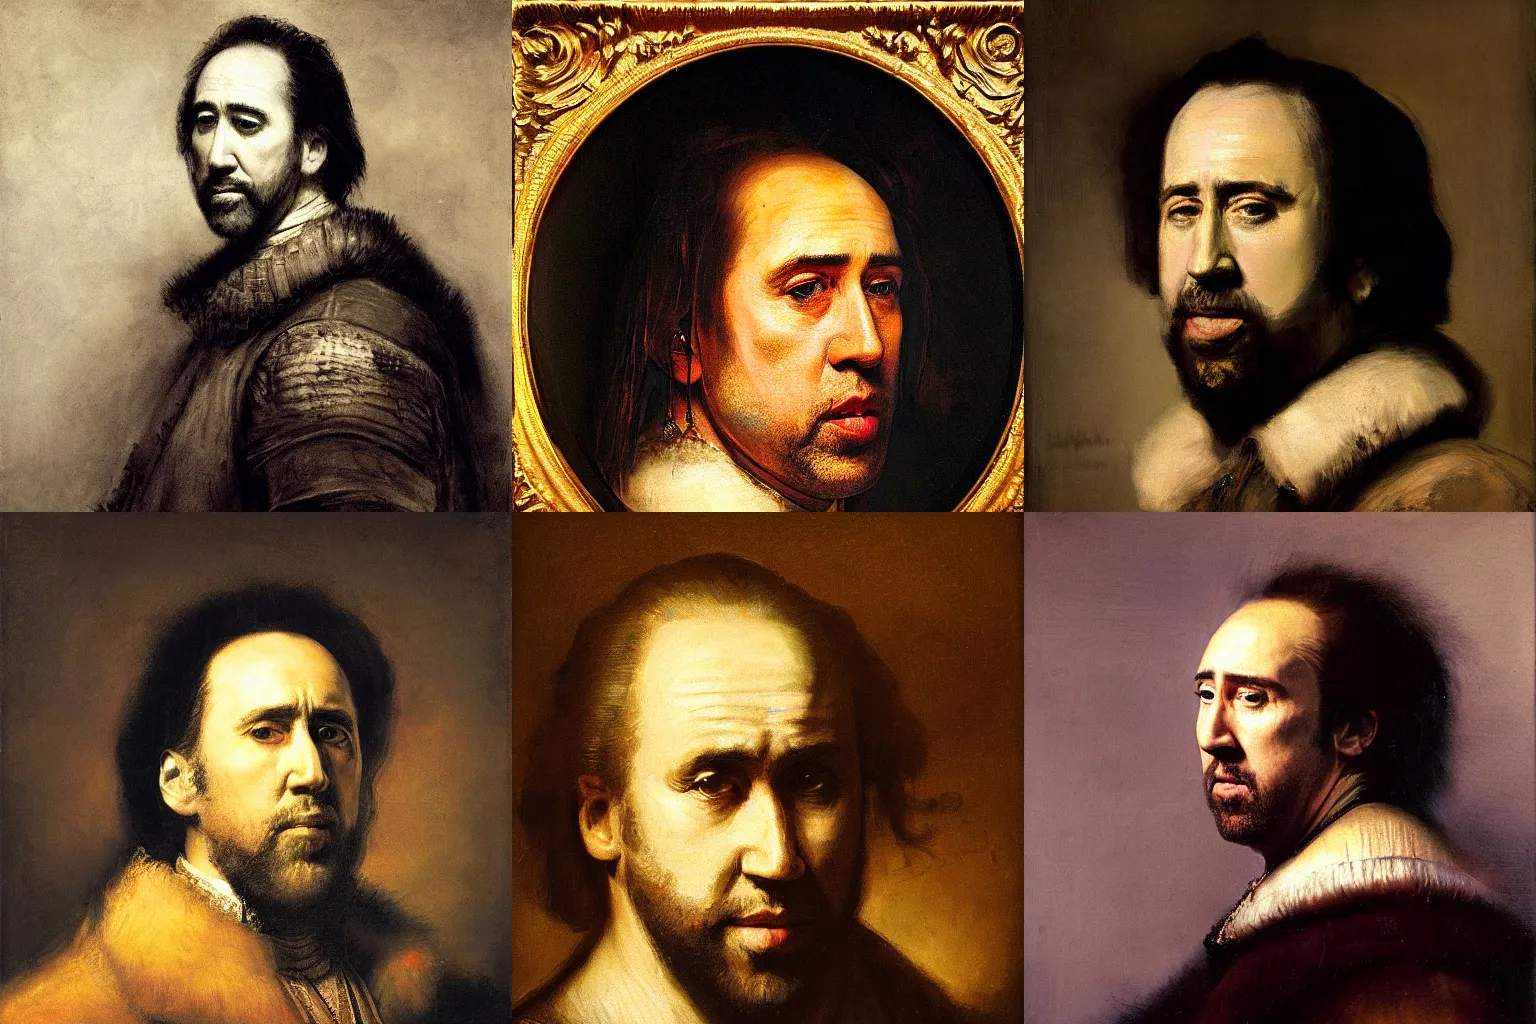 Prompt: a portrait of Nicholas Cage painted by Rembrandt, epic lighting